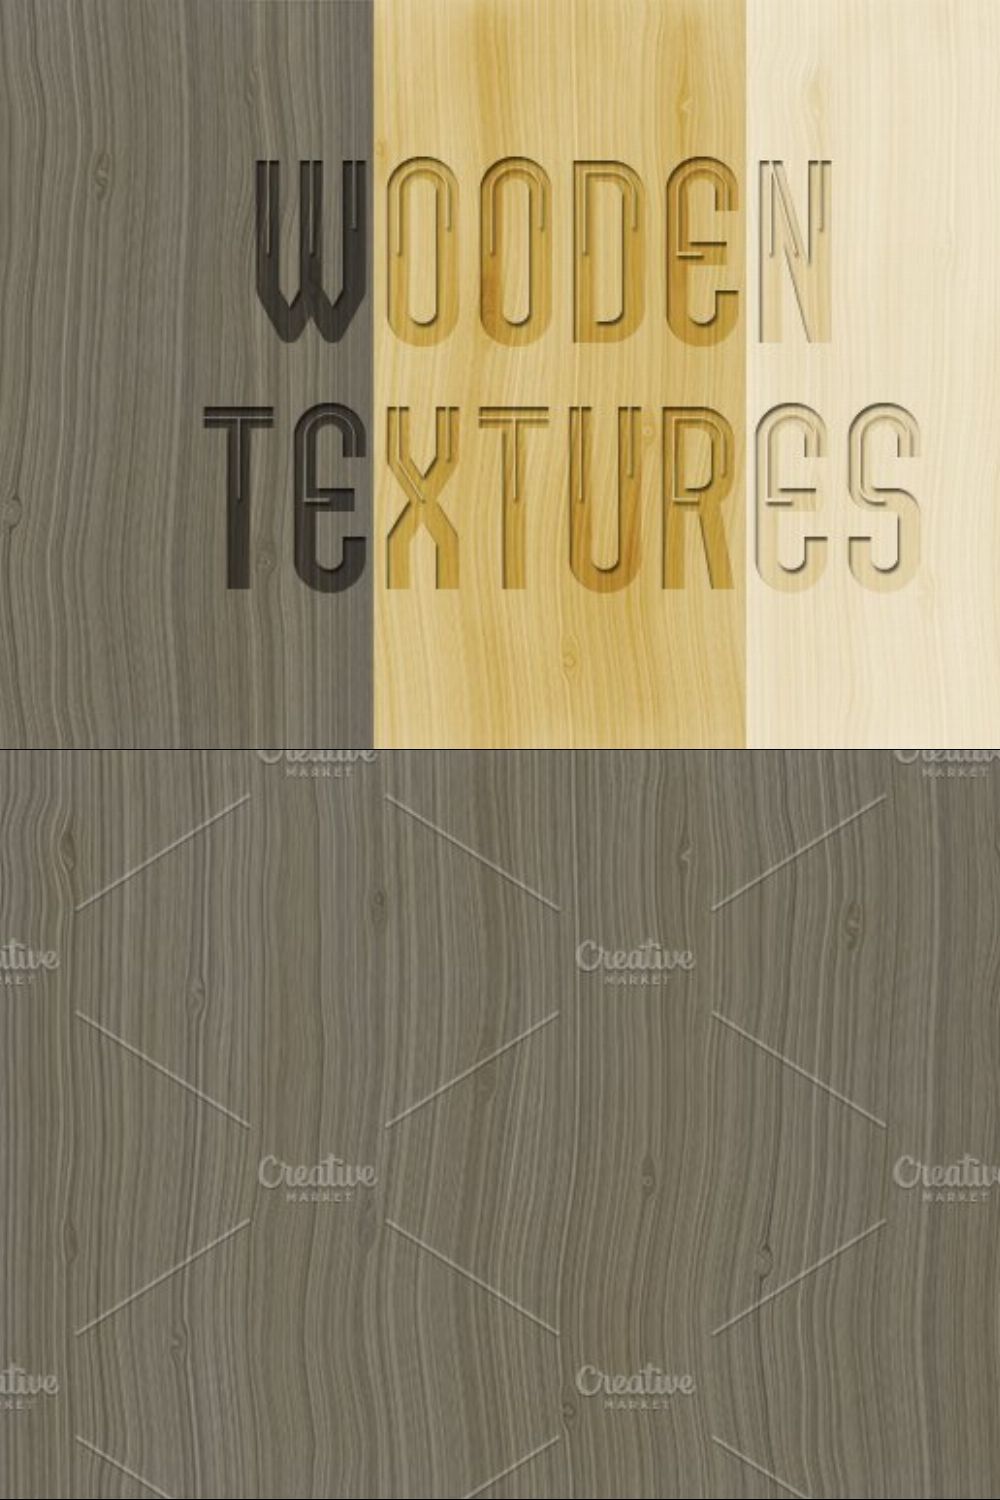 Wooden textures pack pinterest preview image.